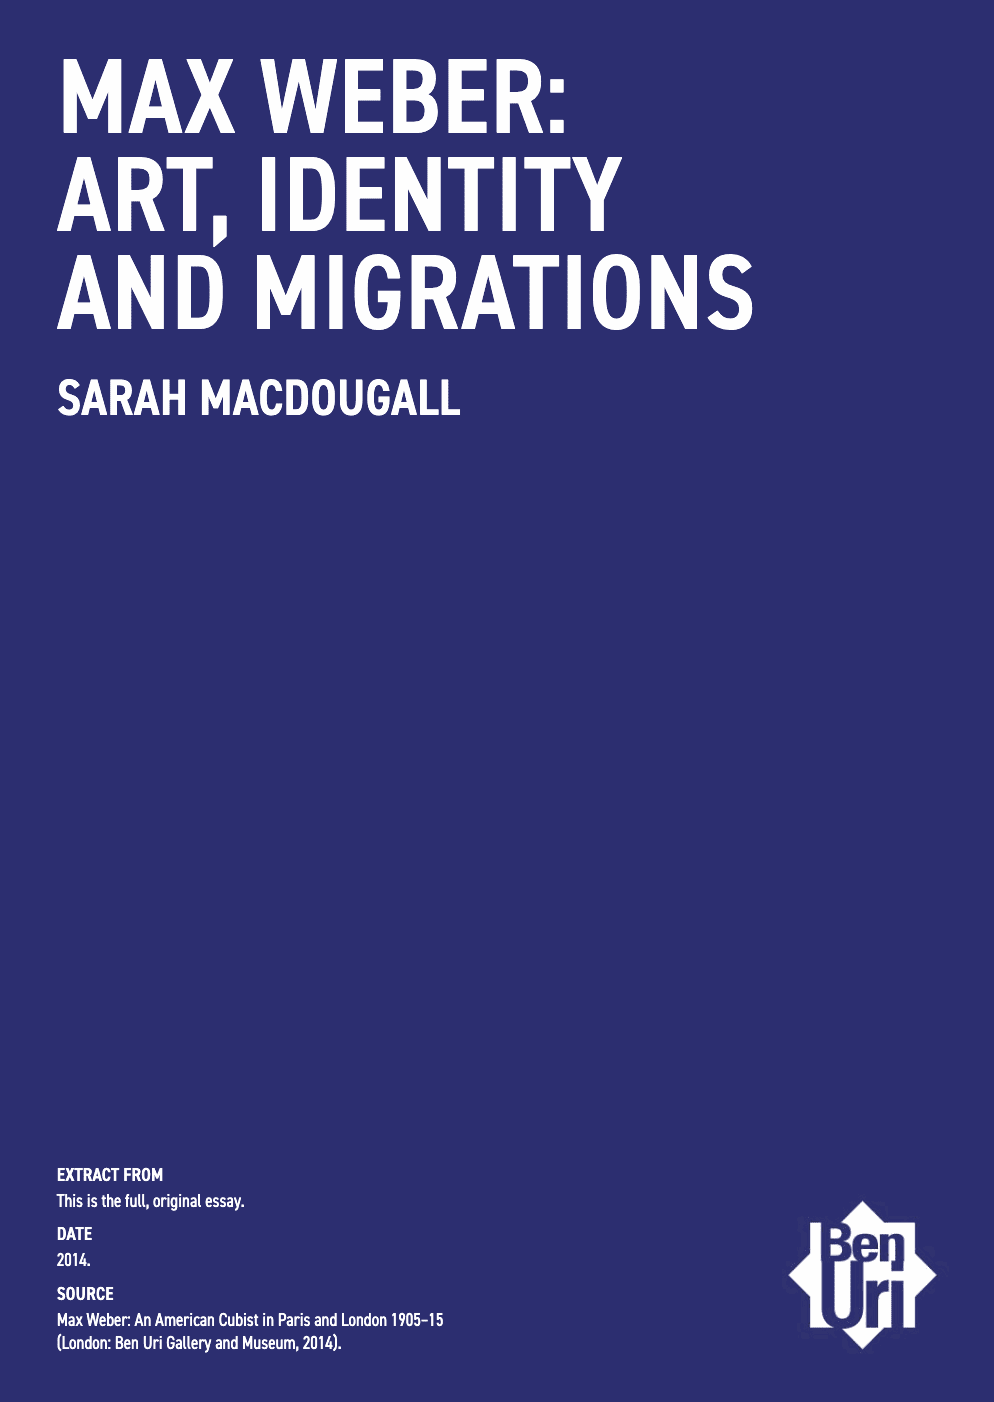 Max Weber: Art, Identity and Migrations by Sarah MacDougall Read it here